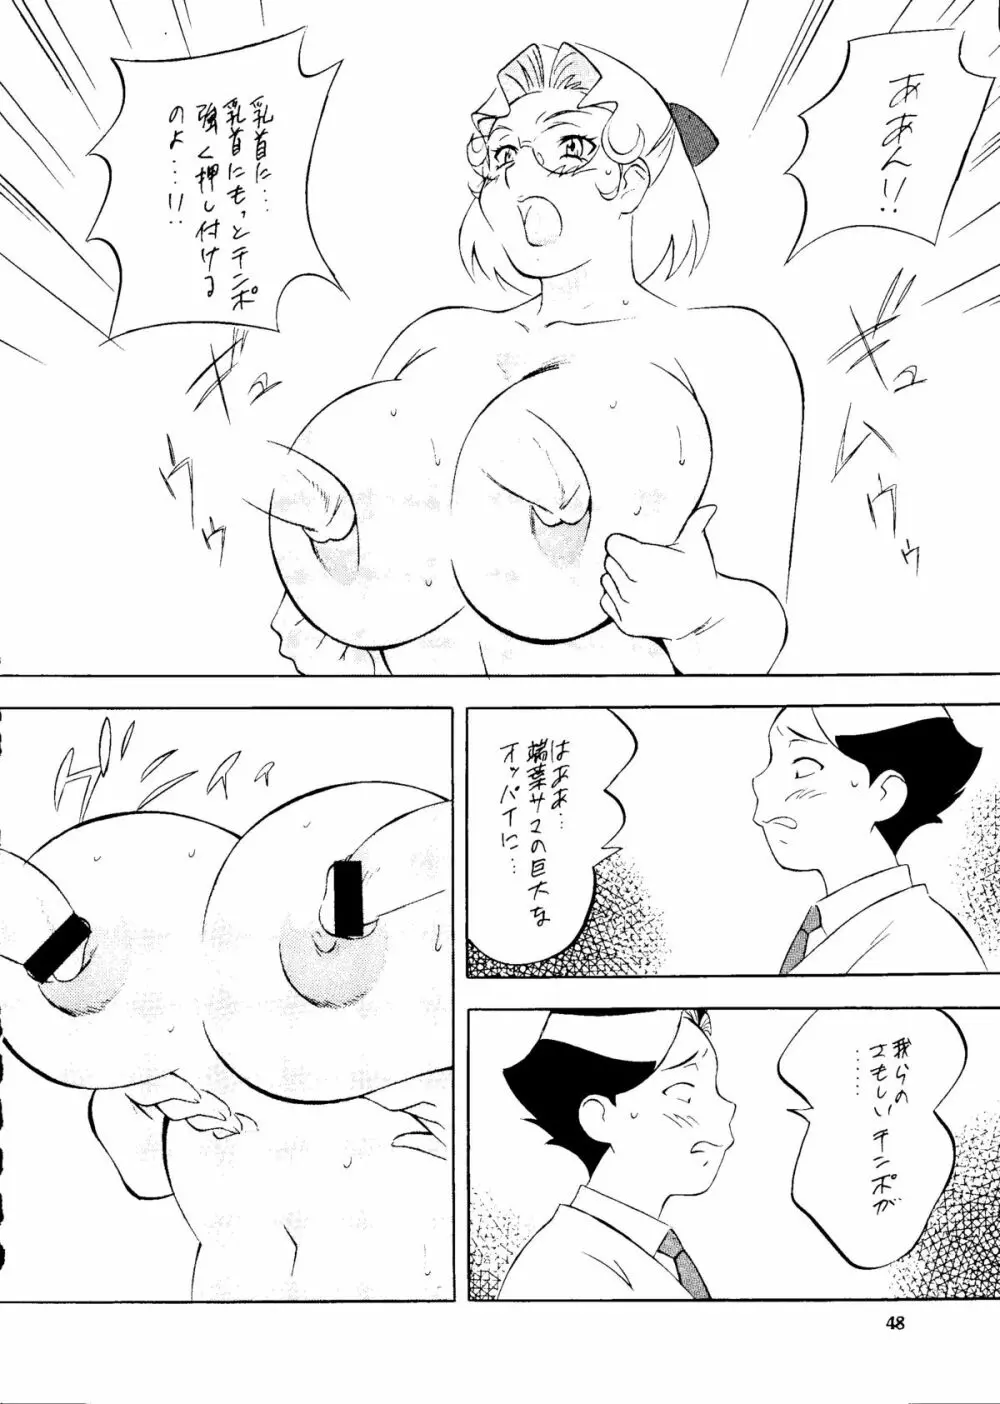 BUY or DIE おかちめんたいこ - page47